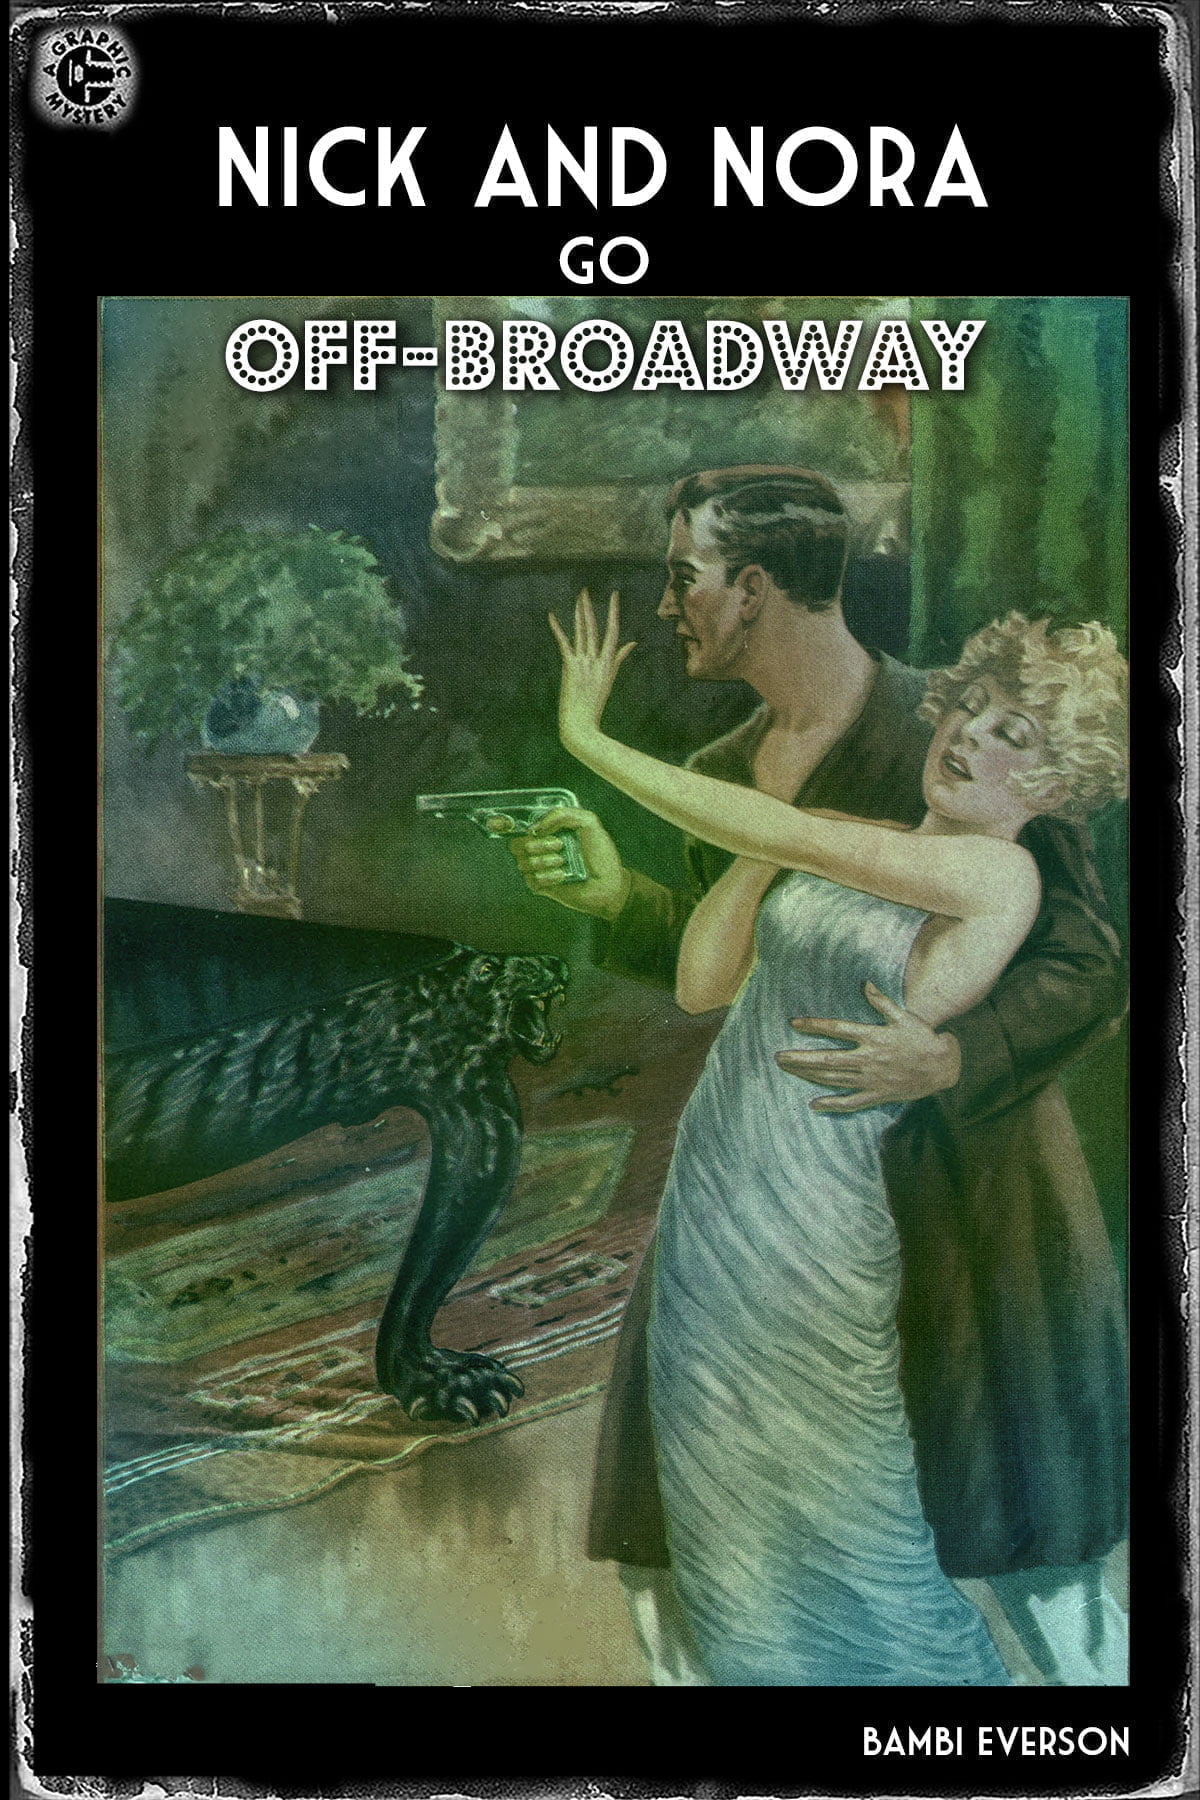 In this standalone sequel to The Thin Man In the Cherry Orchard, Anya convinces Nora to take part in an amateur theater production. As is par for the course, a murder takes place and Nick must solve the crime before opening night. Full length, approx. 100m, one intermission.